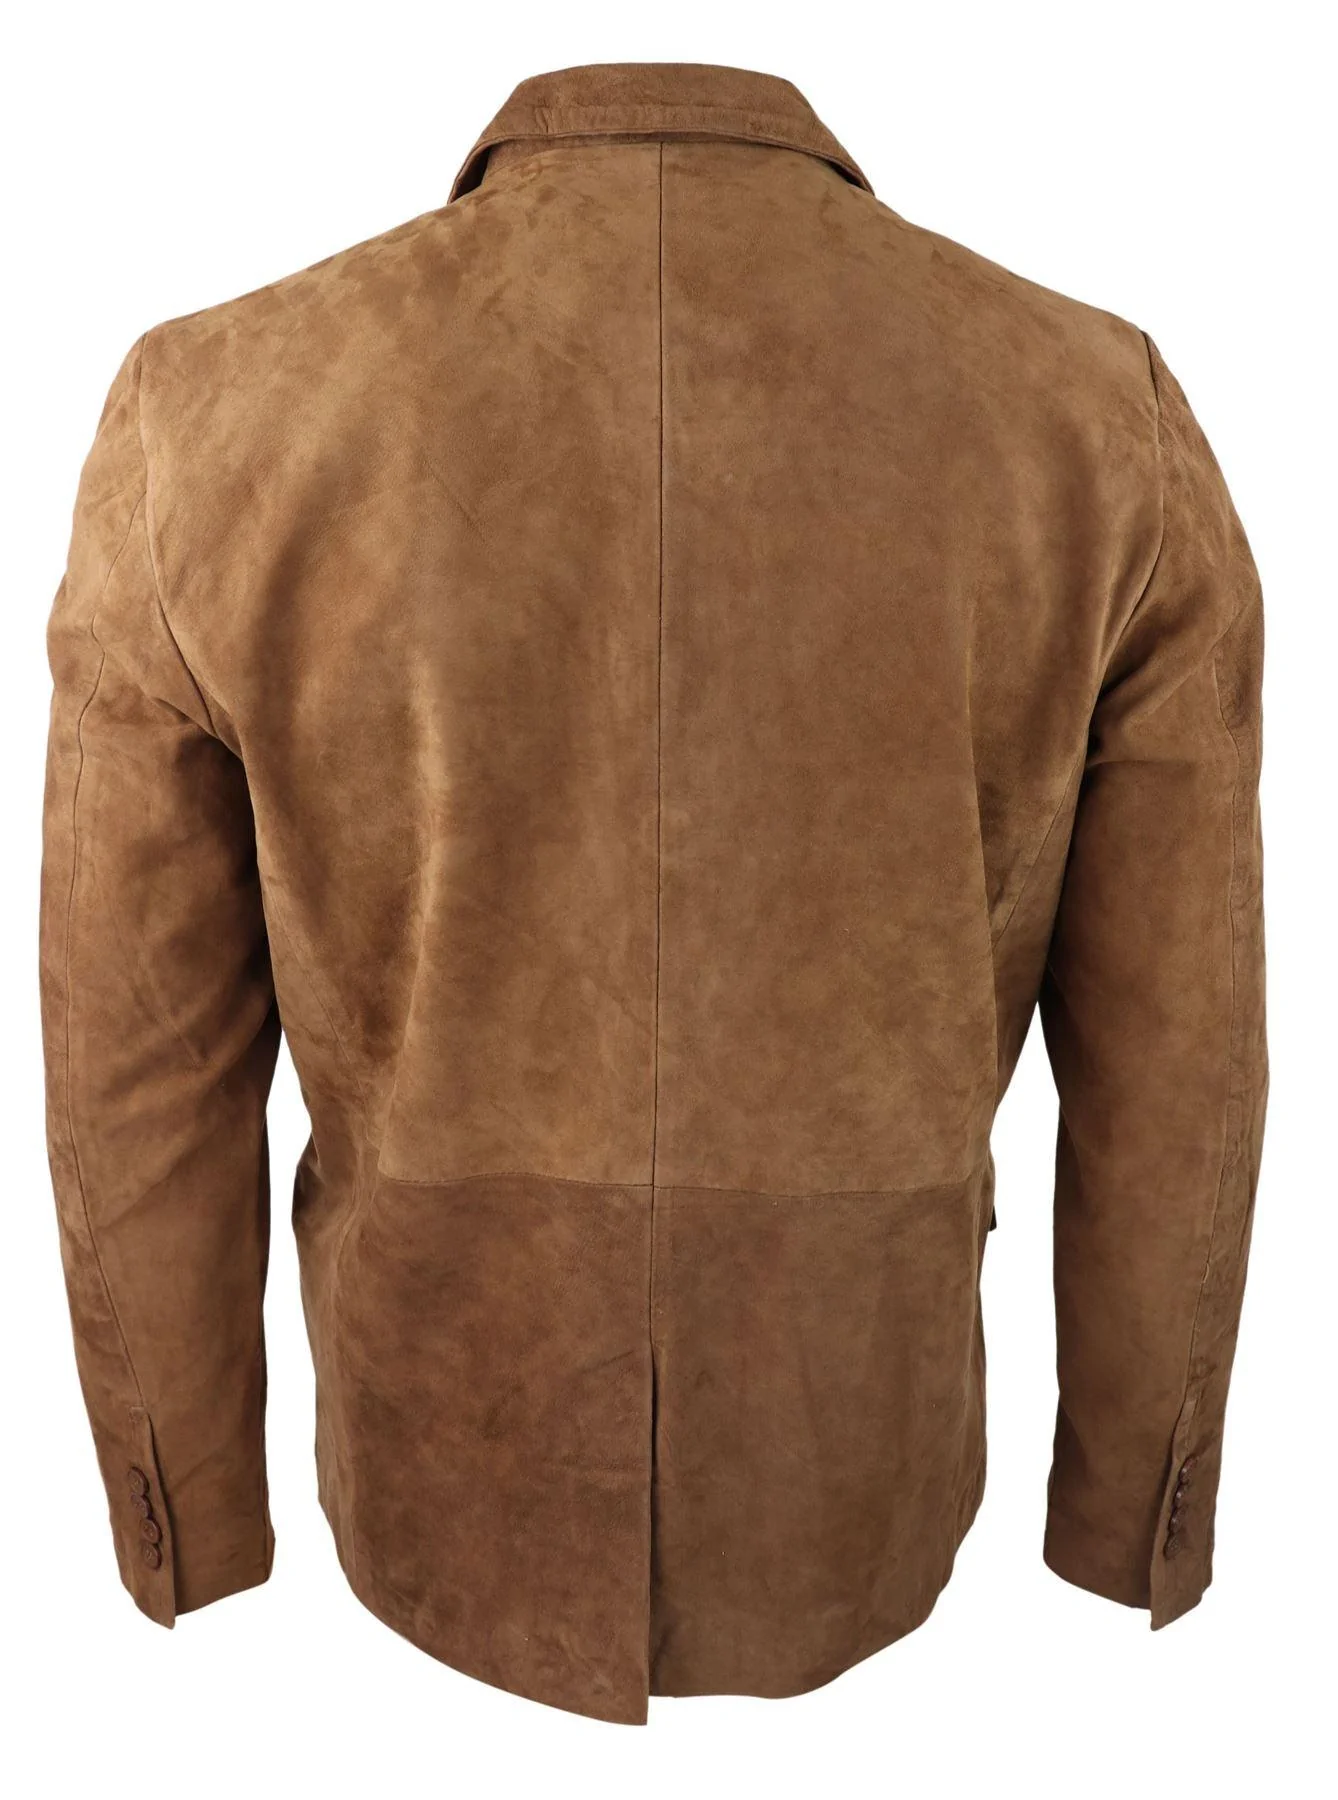 Suede Jacket Outfits for Men  34 Ways to Wear Suede Jackets